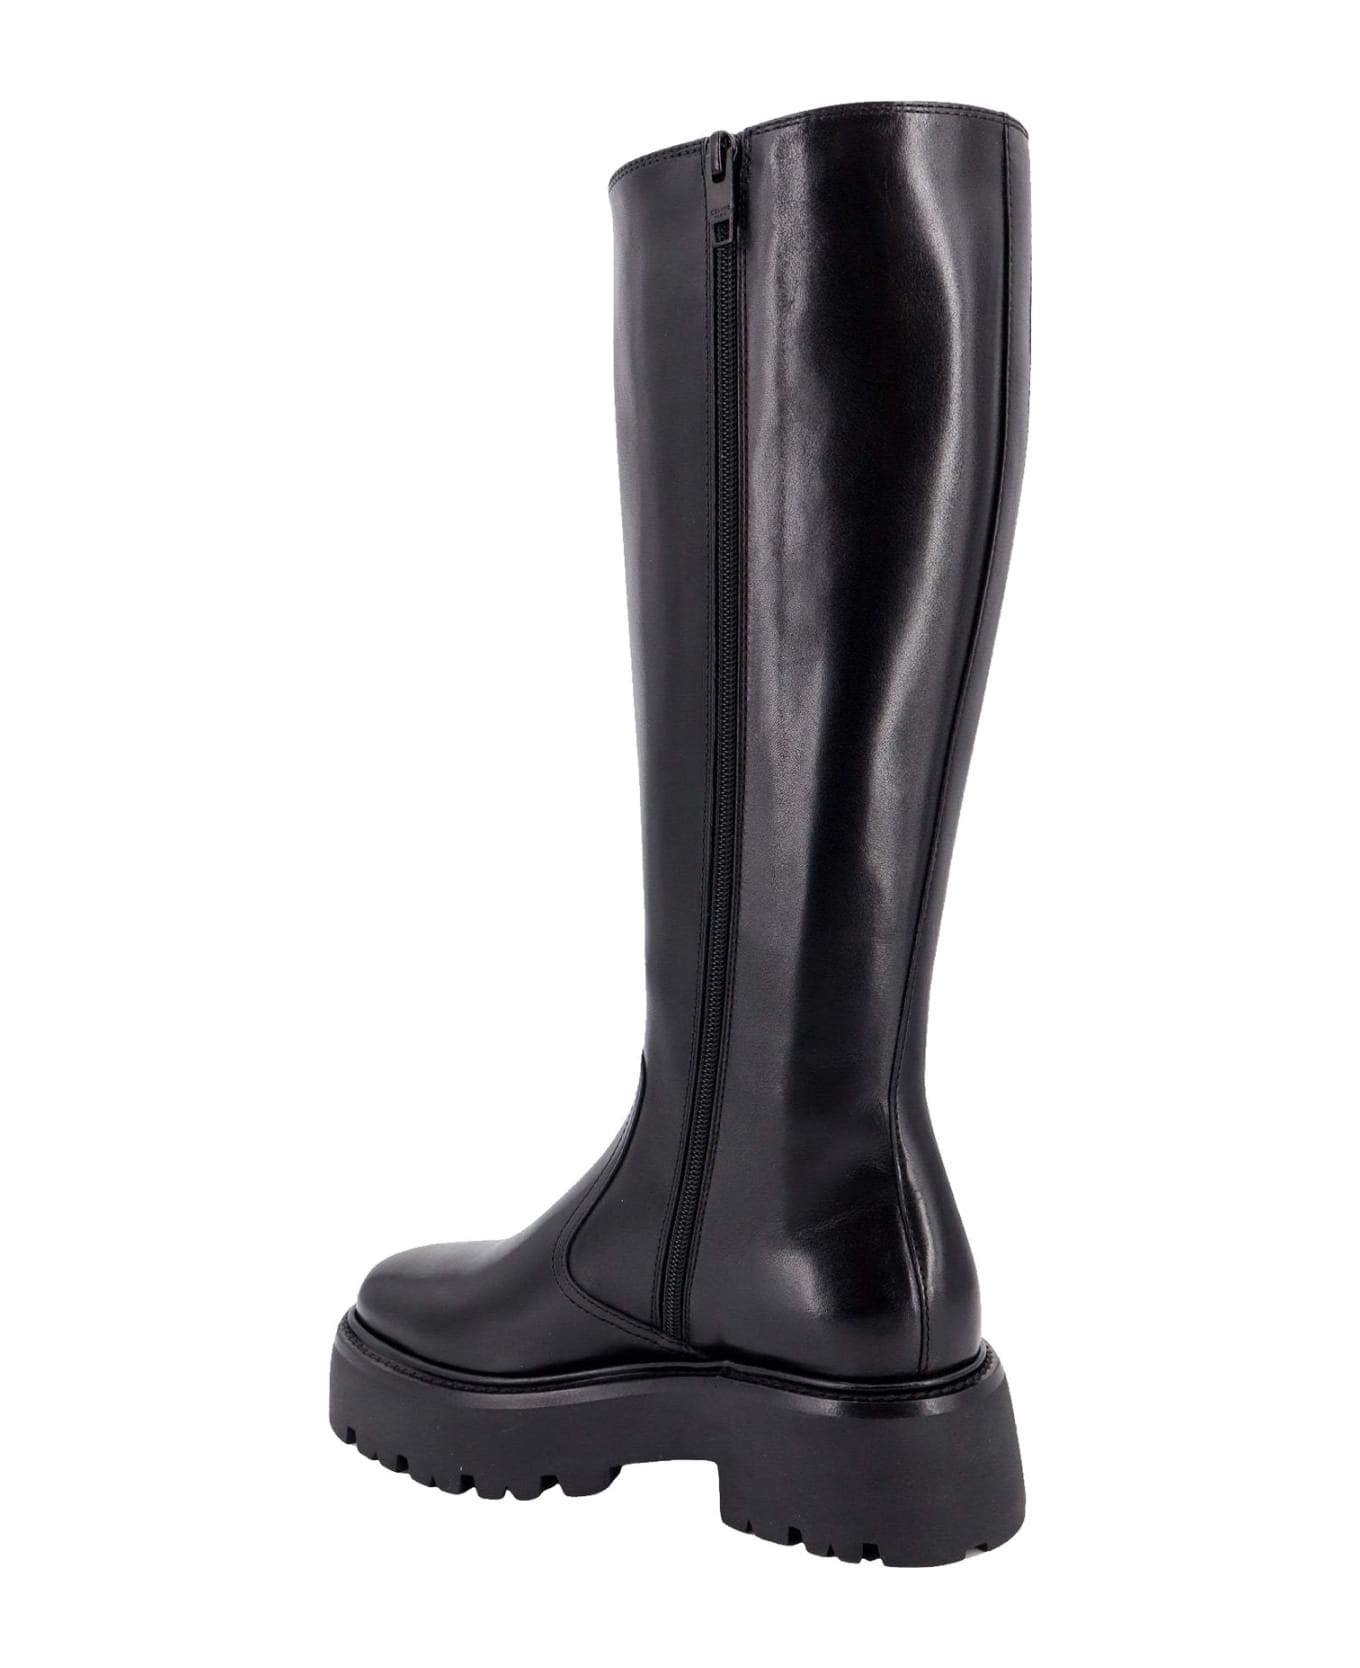 Celine Leather Zipped Boots - Black